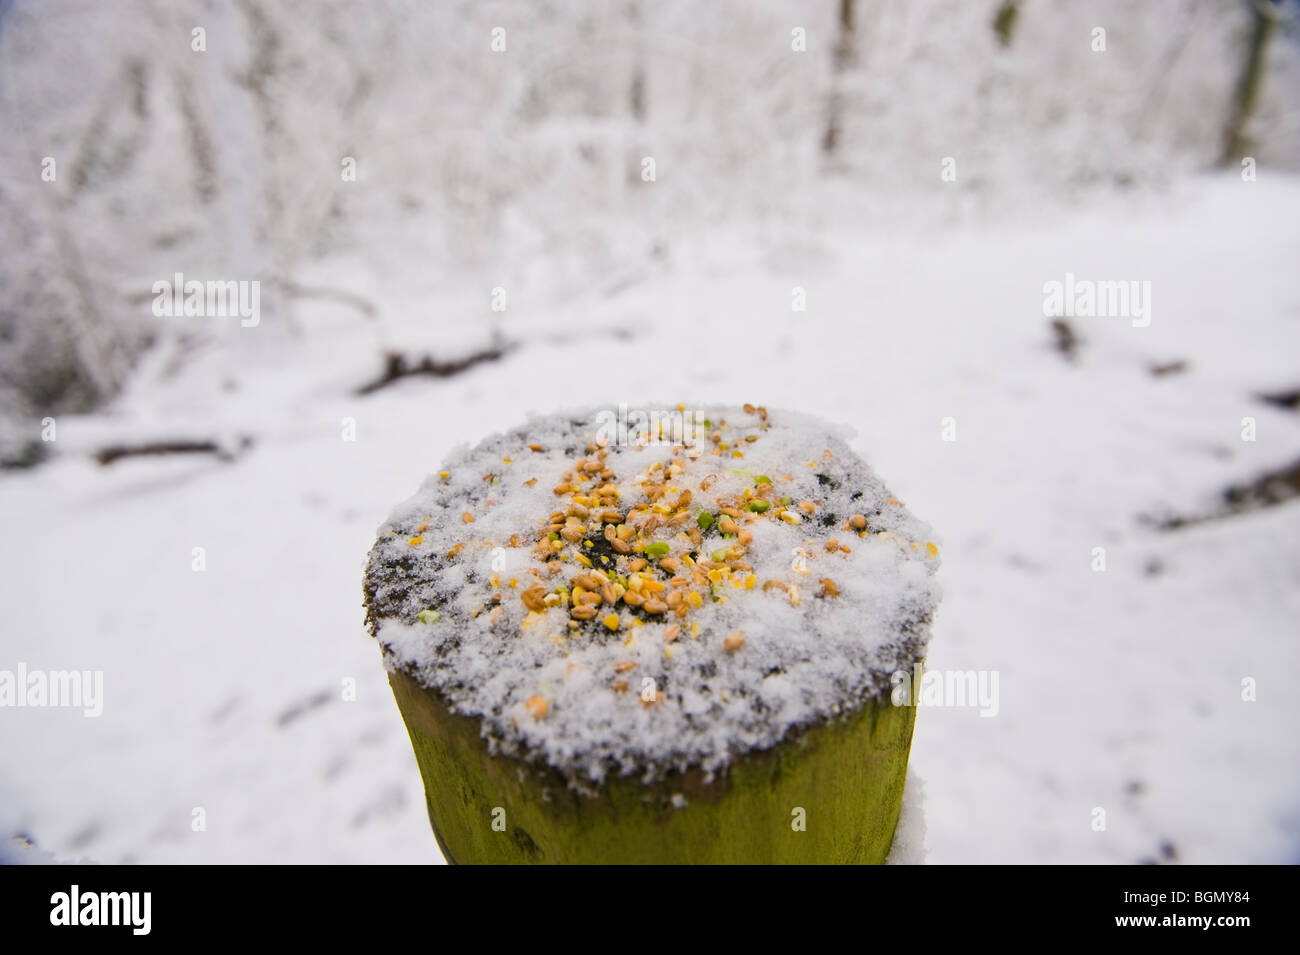 Food for wild birds placed on top of fencepost in winter snow at Allt Yr Yn Nature Reserve Newport South Wales UK Stock Photo